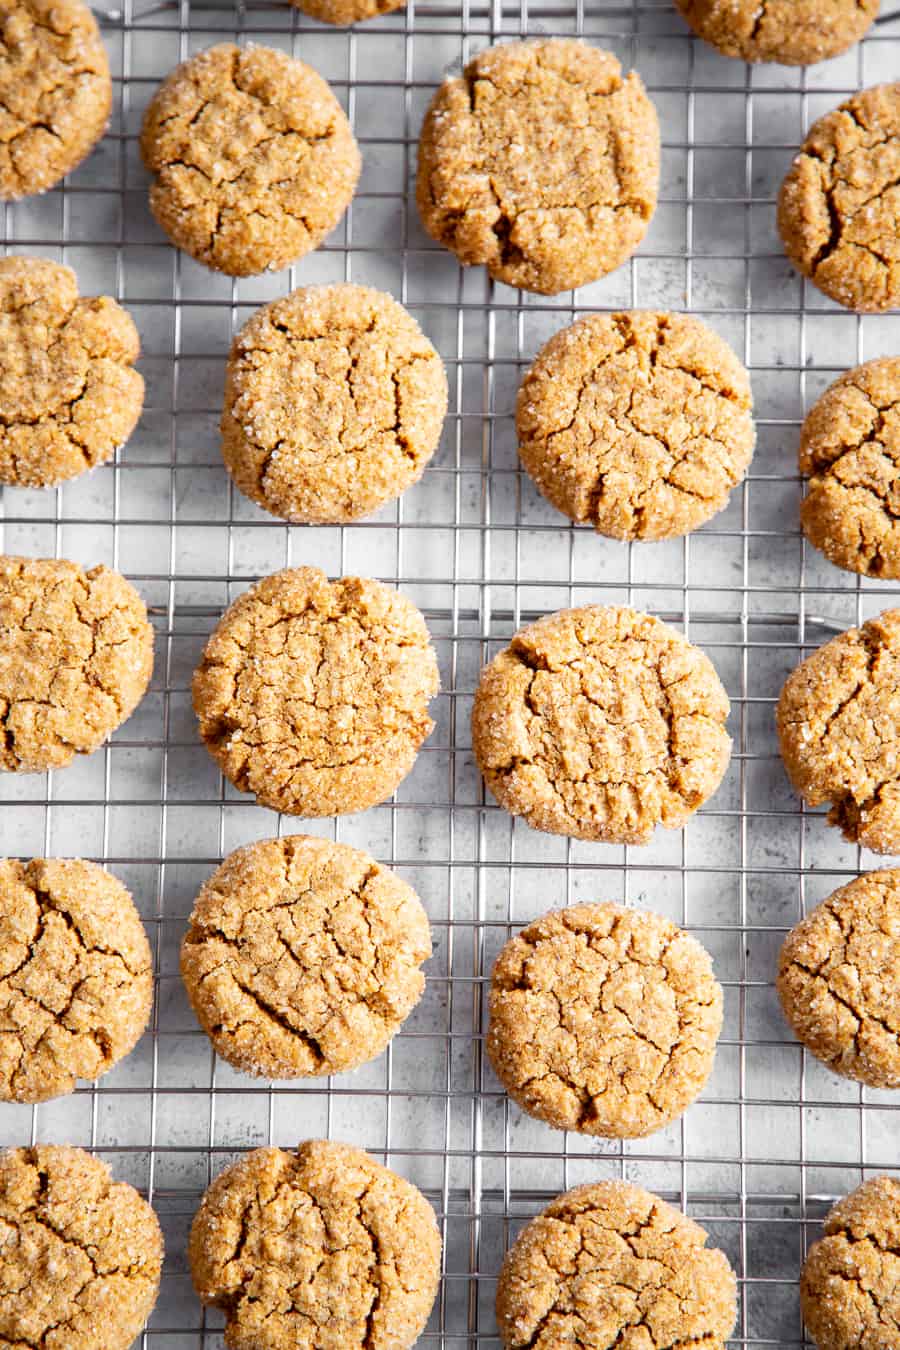 These one bowl peanut butter cookies are make with your favorite creamy nut butter and just a few simple, healthy ingredients!  They’re soft and a little crisp, egg free, vegan, and perfect for simple desserts and snacks, and to make with kids!  Use almond or cashew butter to keep them paleo or peanut butter if you prefer! #paleo #vegan #glutenfree